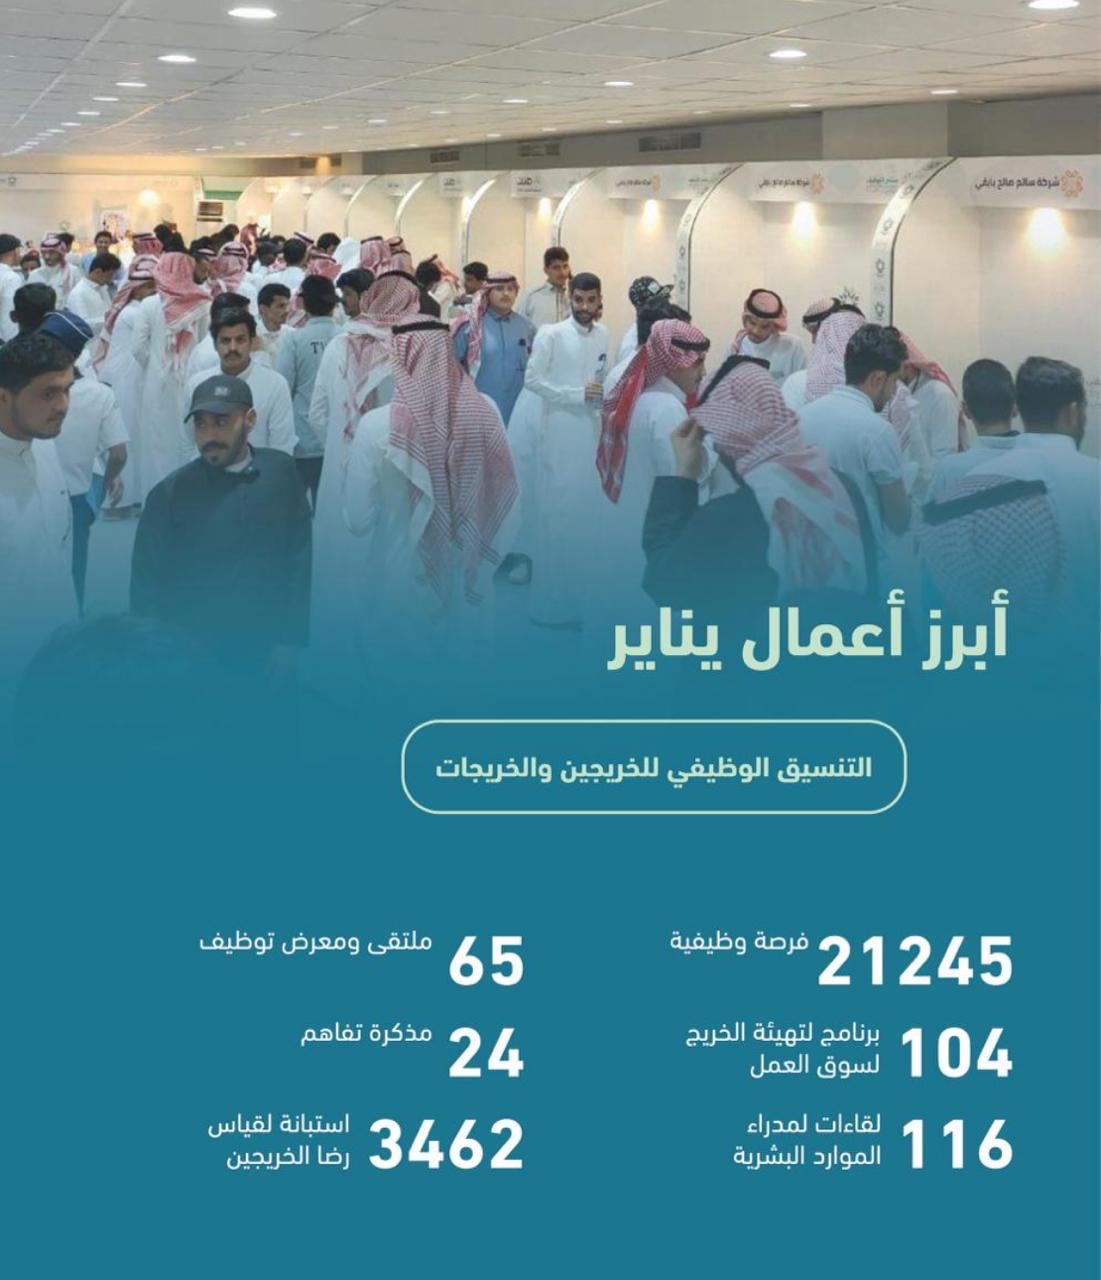 Technical Training Provides More Than (21) Thousand Job Opportunities for Graduates in January